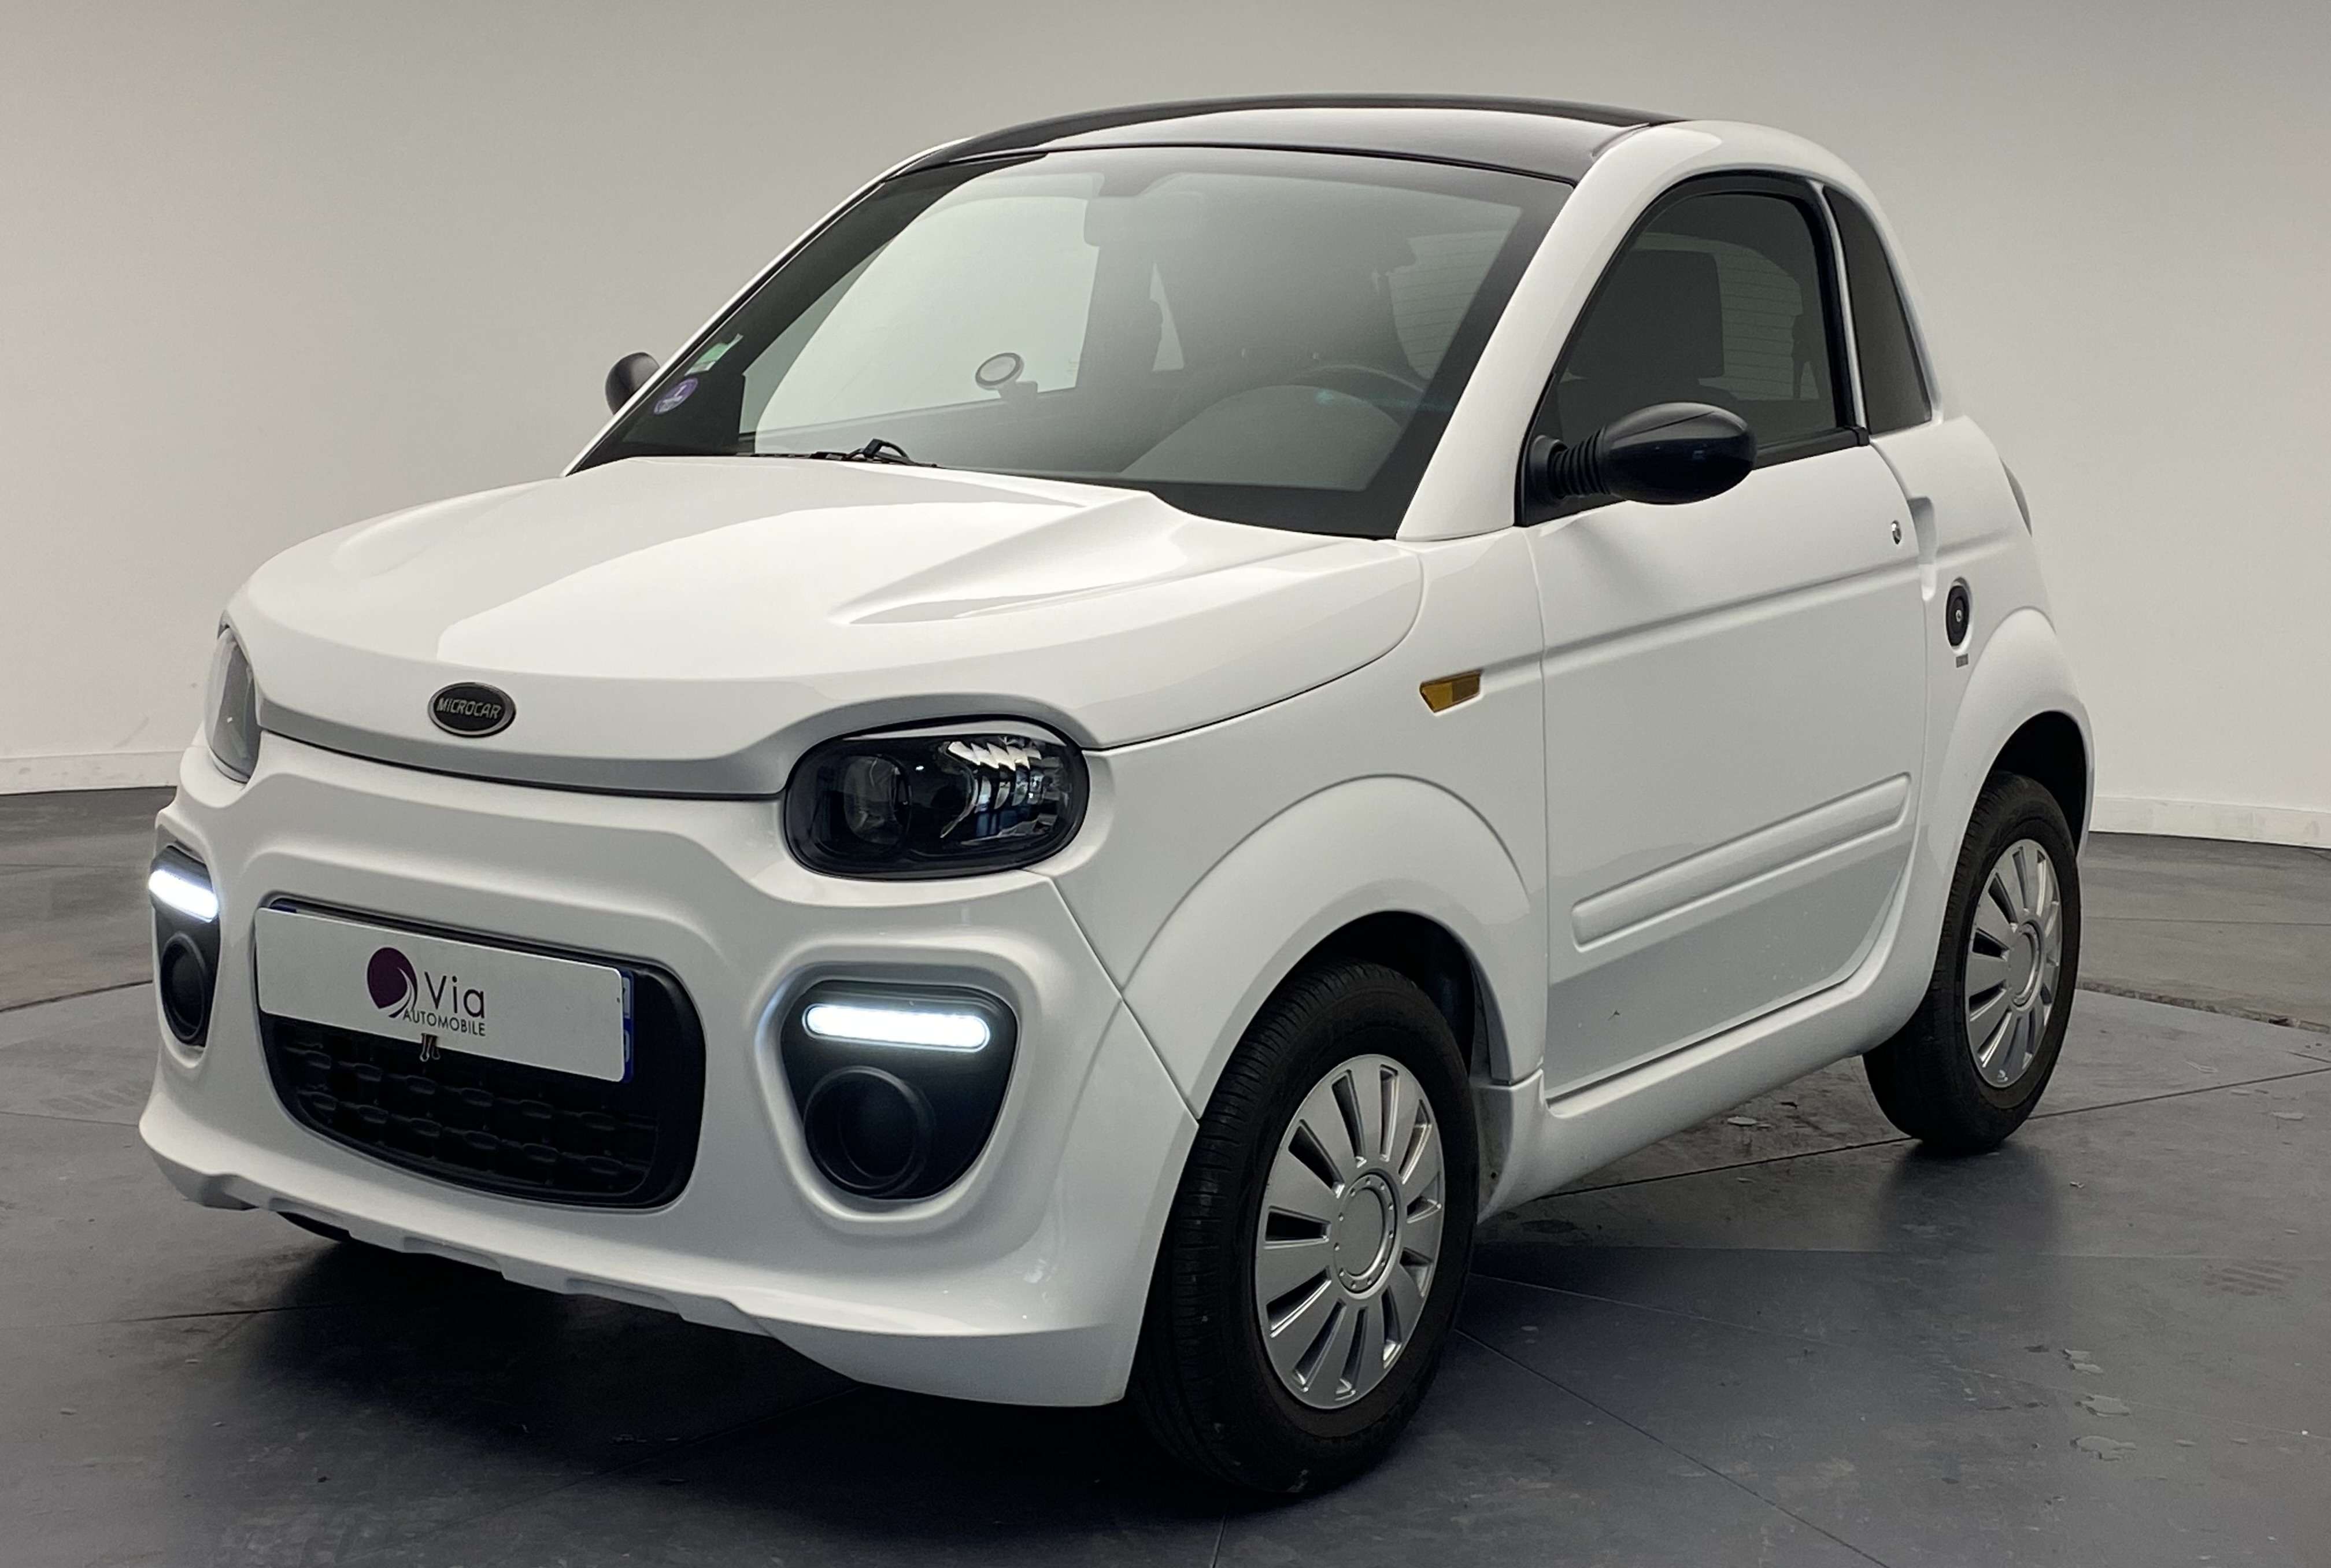 Microcar M.Go Other in White used in Roncq for € 8,490.-